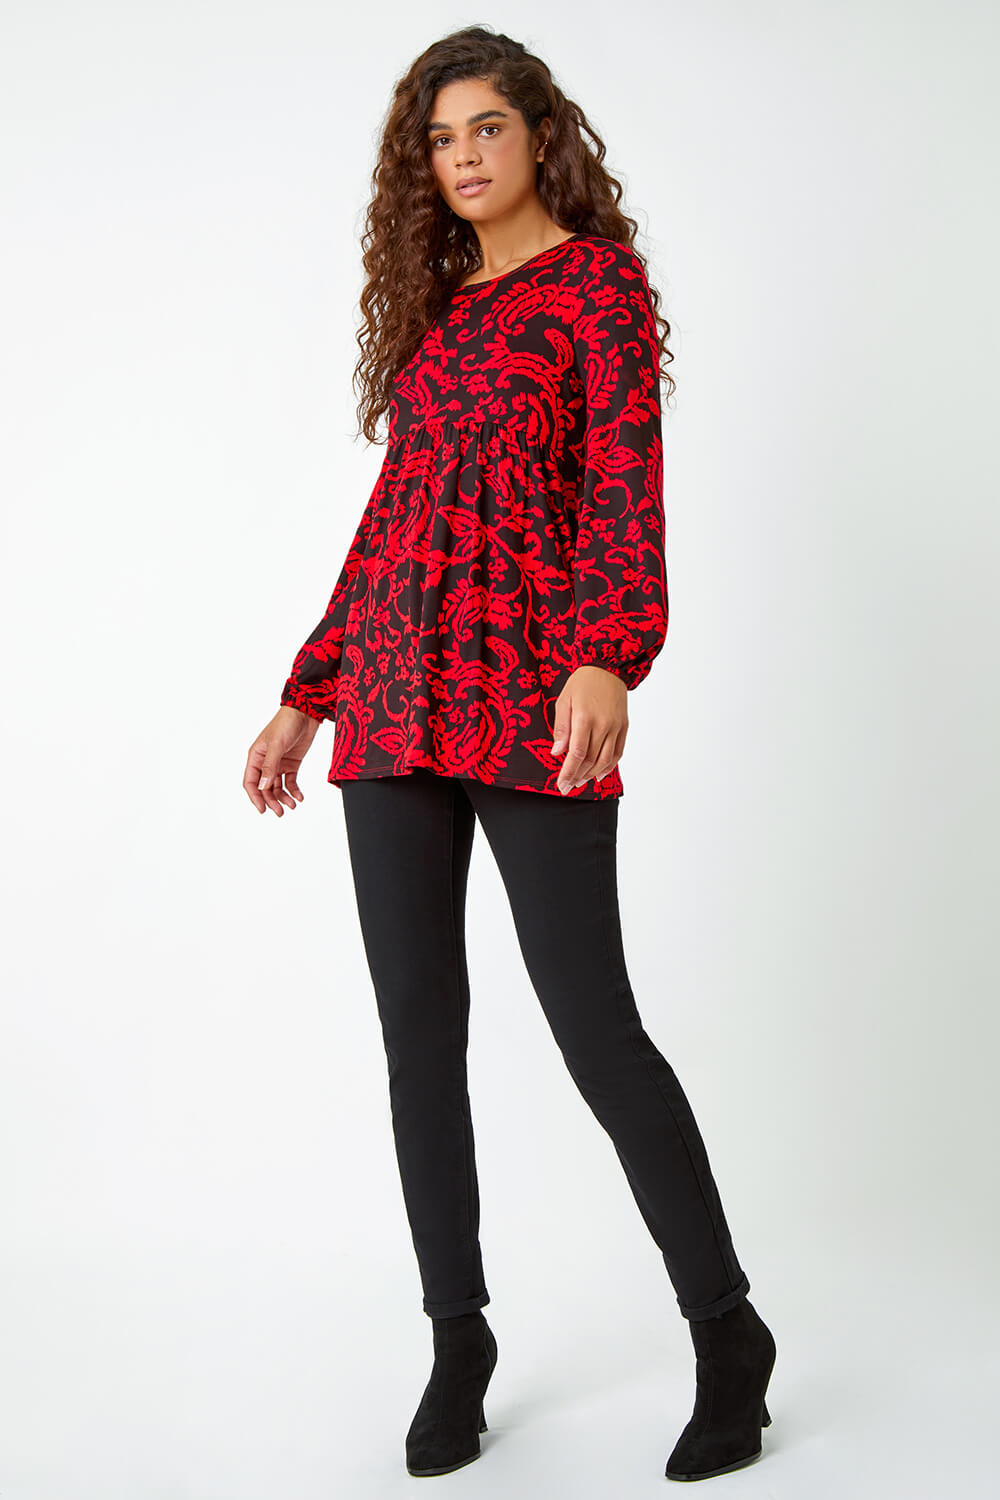 Red Floral Pocket Detail Tunic Stretch Top, Image 2 of 5